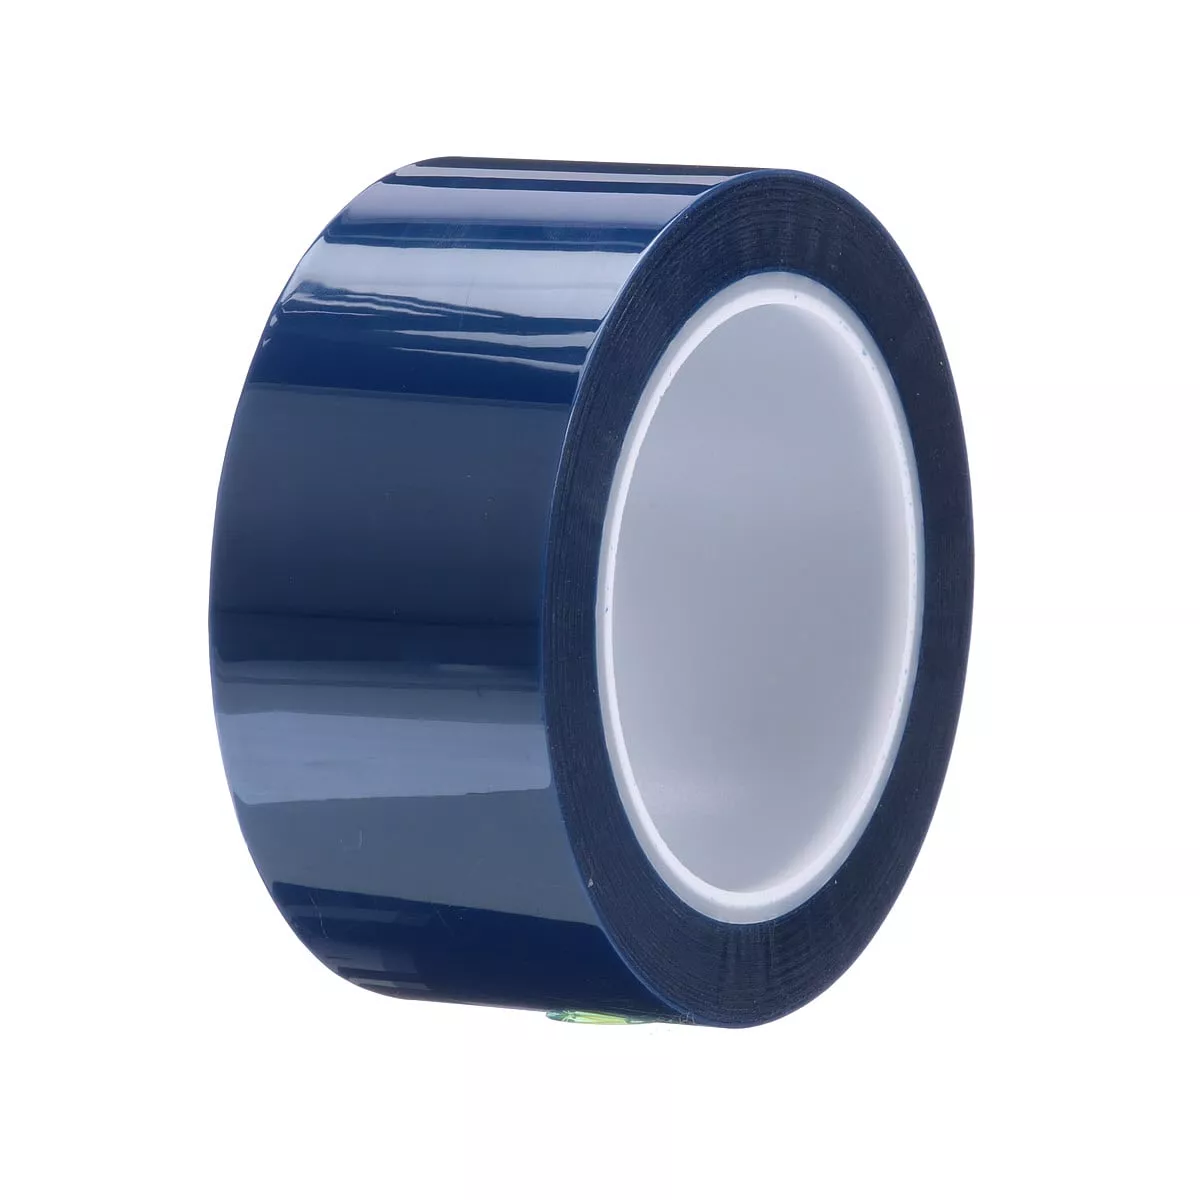 3M™ Polyester Tape 8991, Blue, 2 in x 72 yd, 2.4 mil, 24 Roll/Case